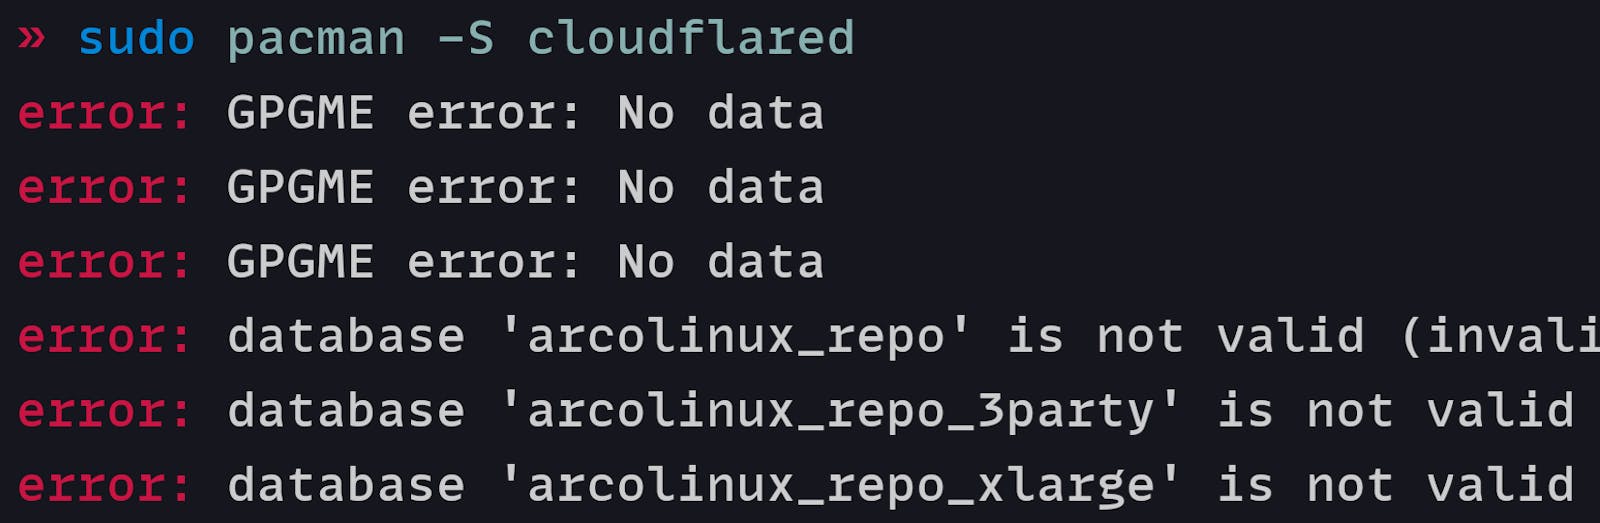 error: database 'arcolinux_repo' is not valid